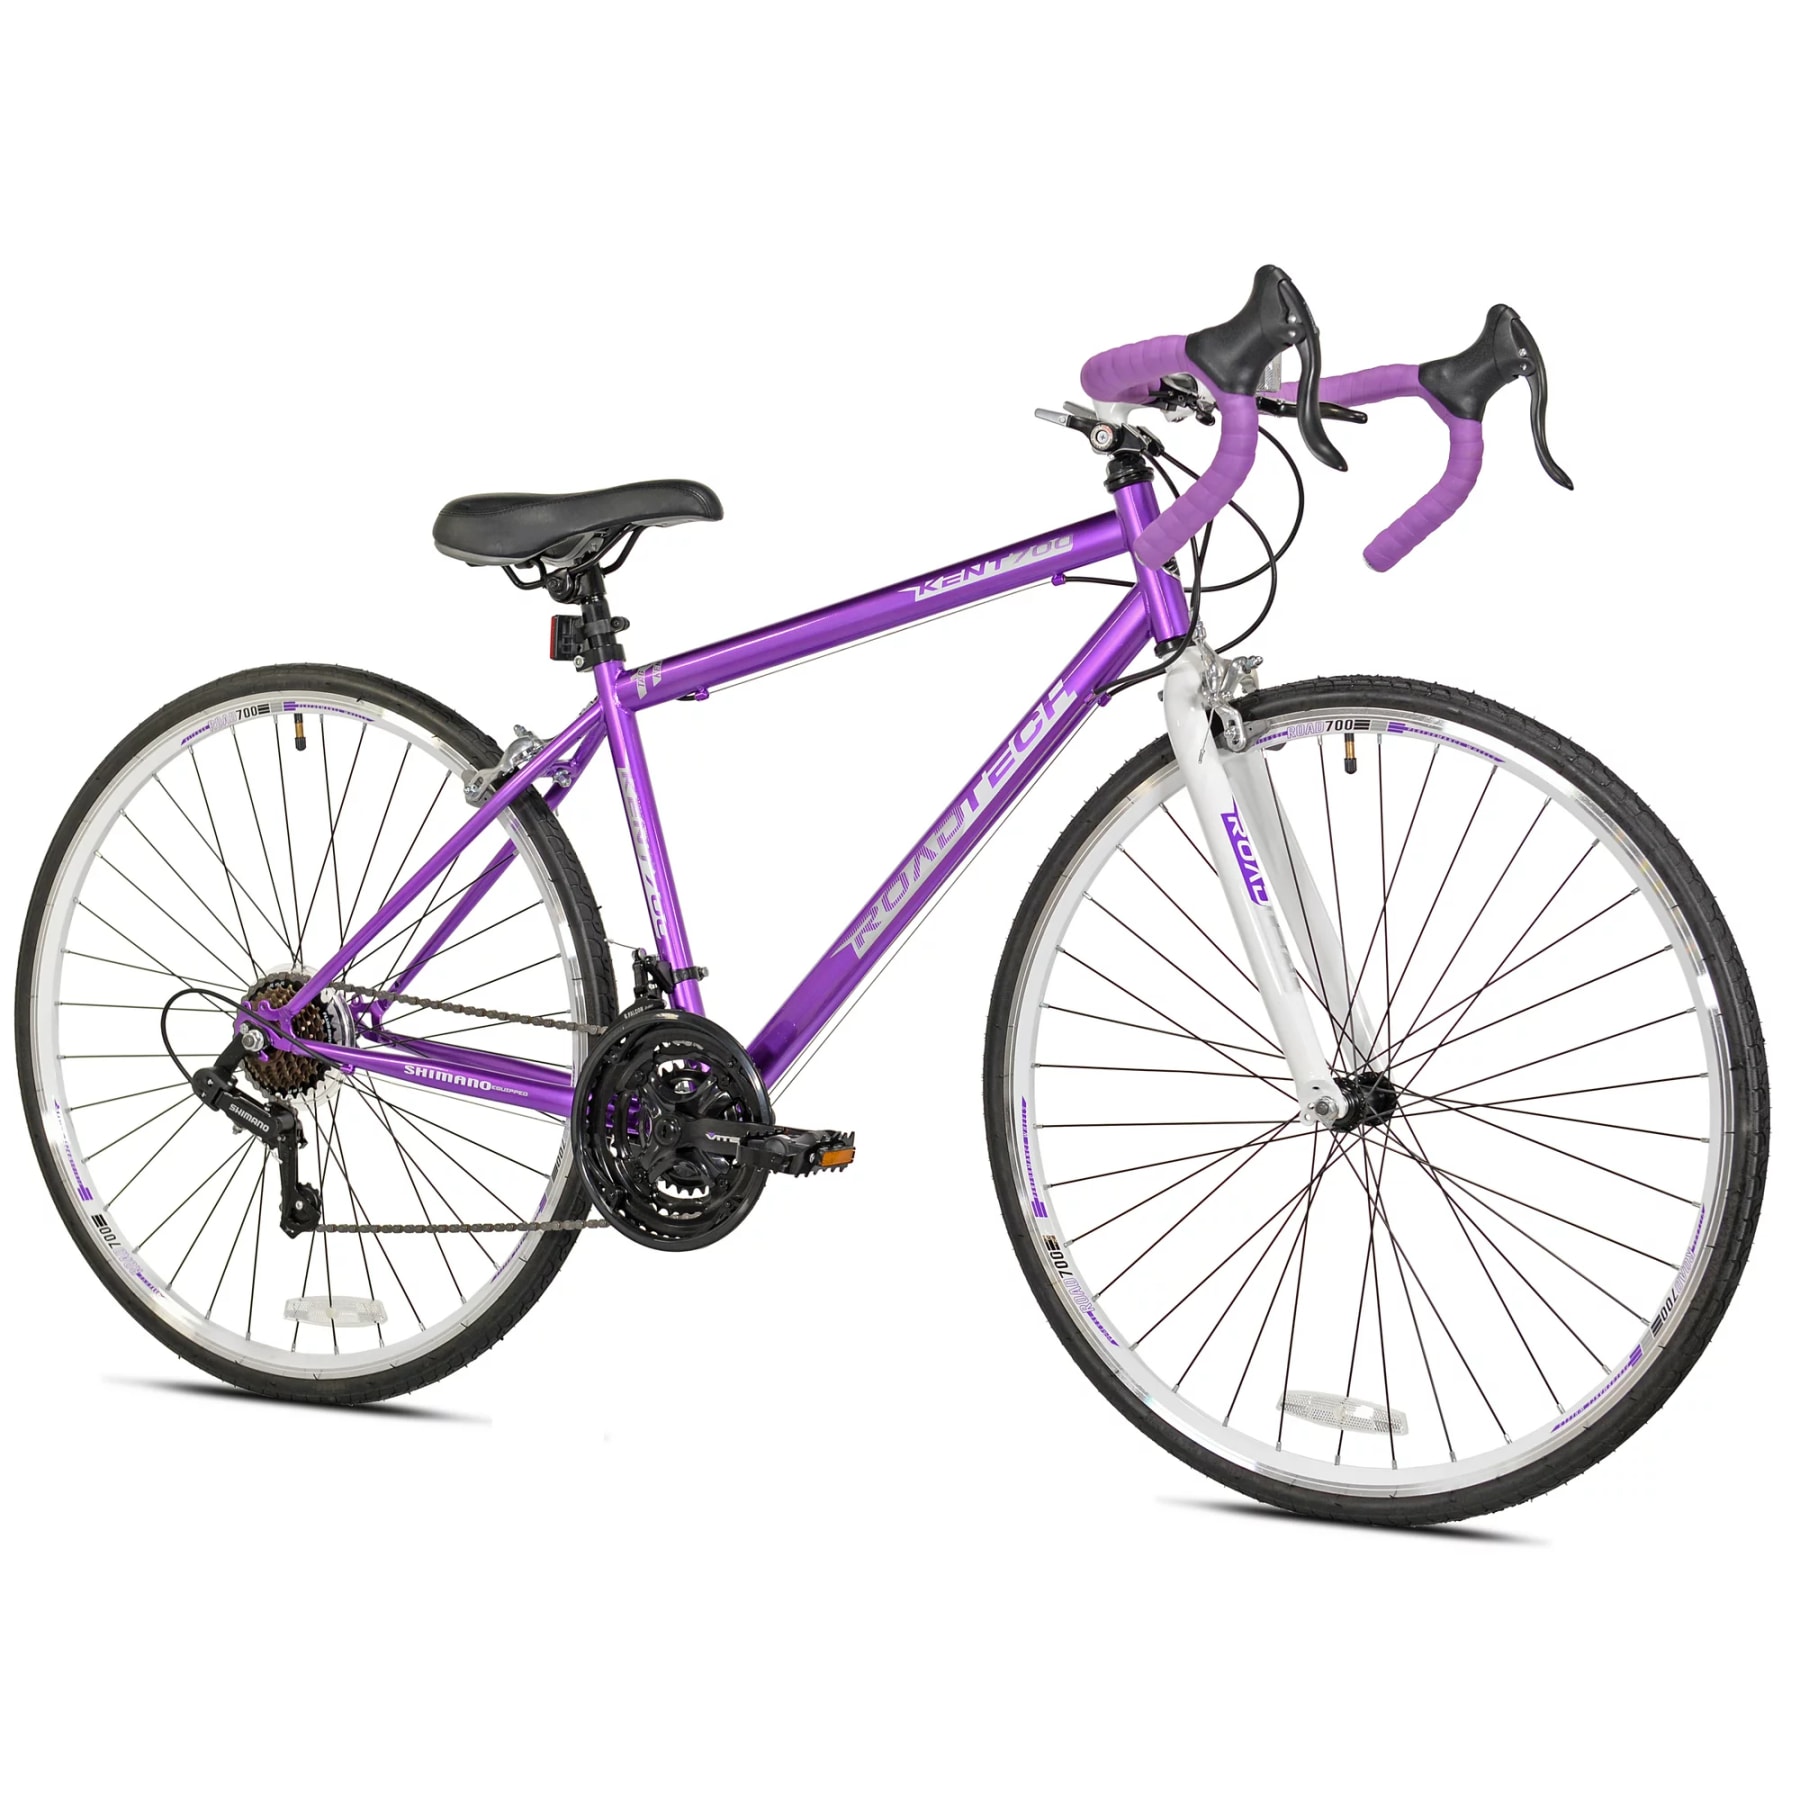 A woman's bicycle.